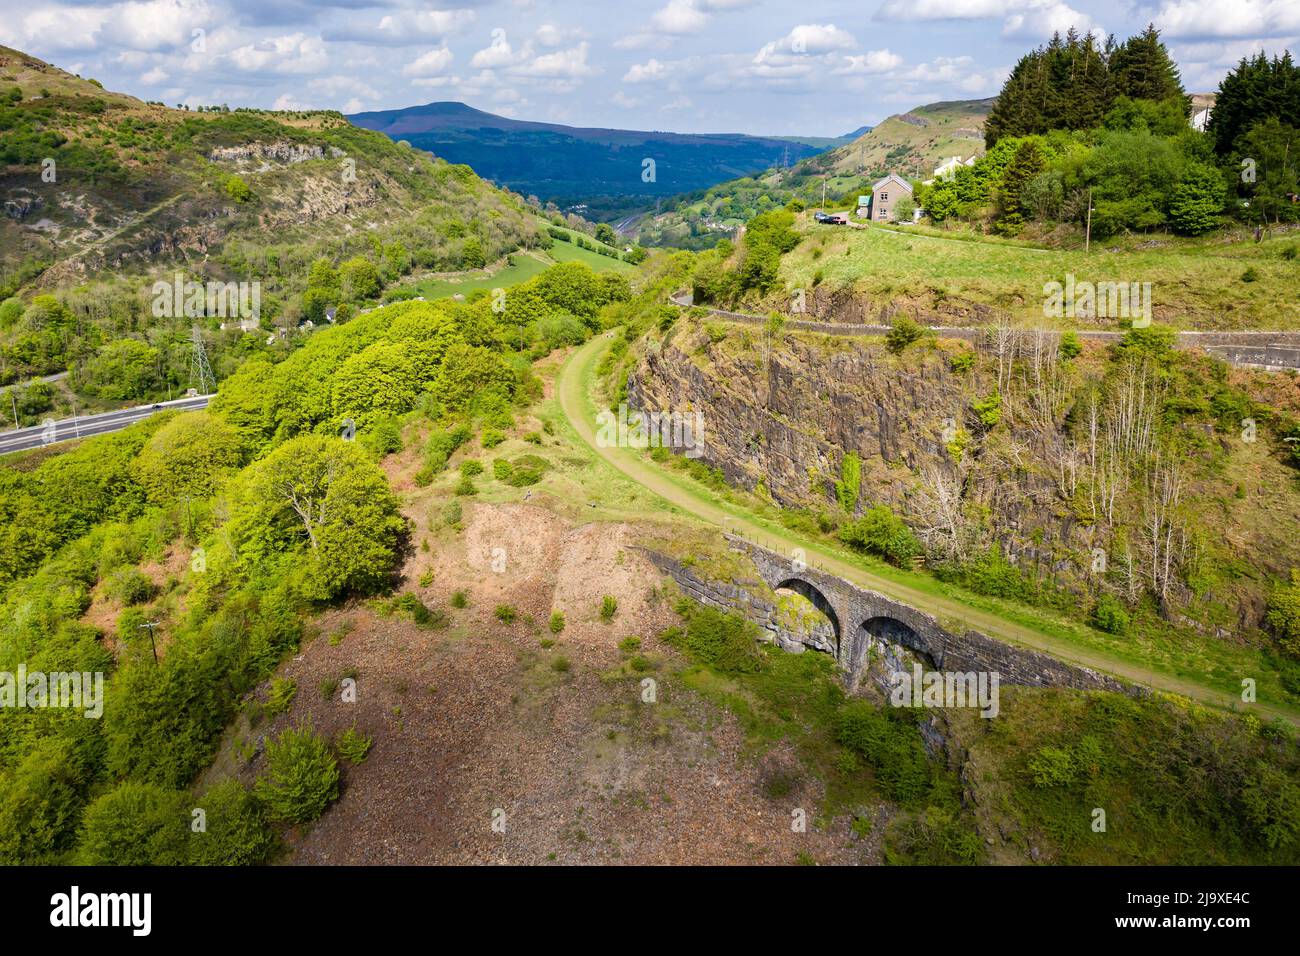 Aerial view of an old tram road converted to a cycle route near the village of Clydach in South Wales, UK Stock Photo